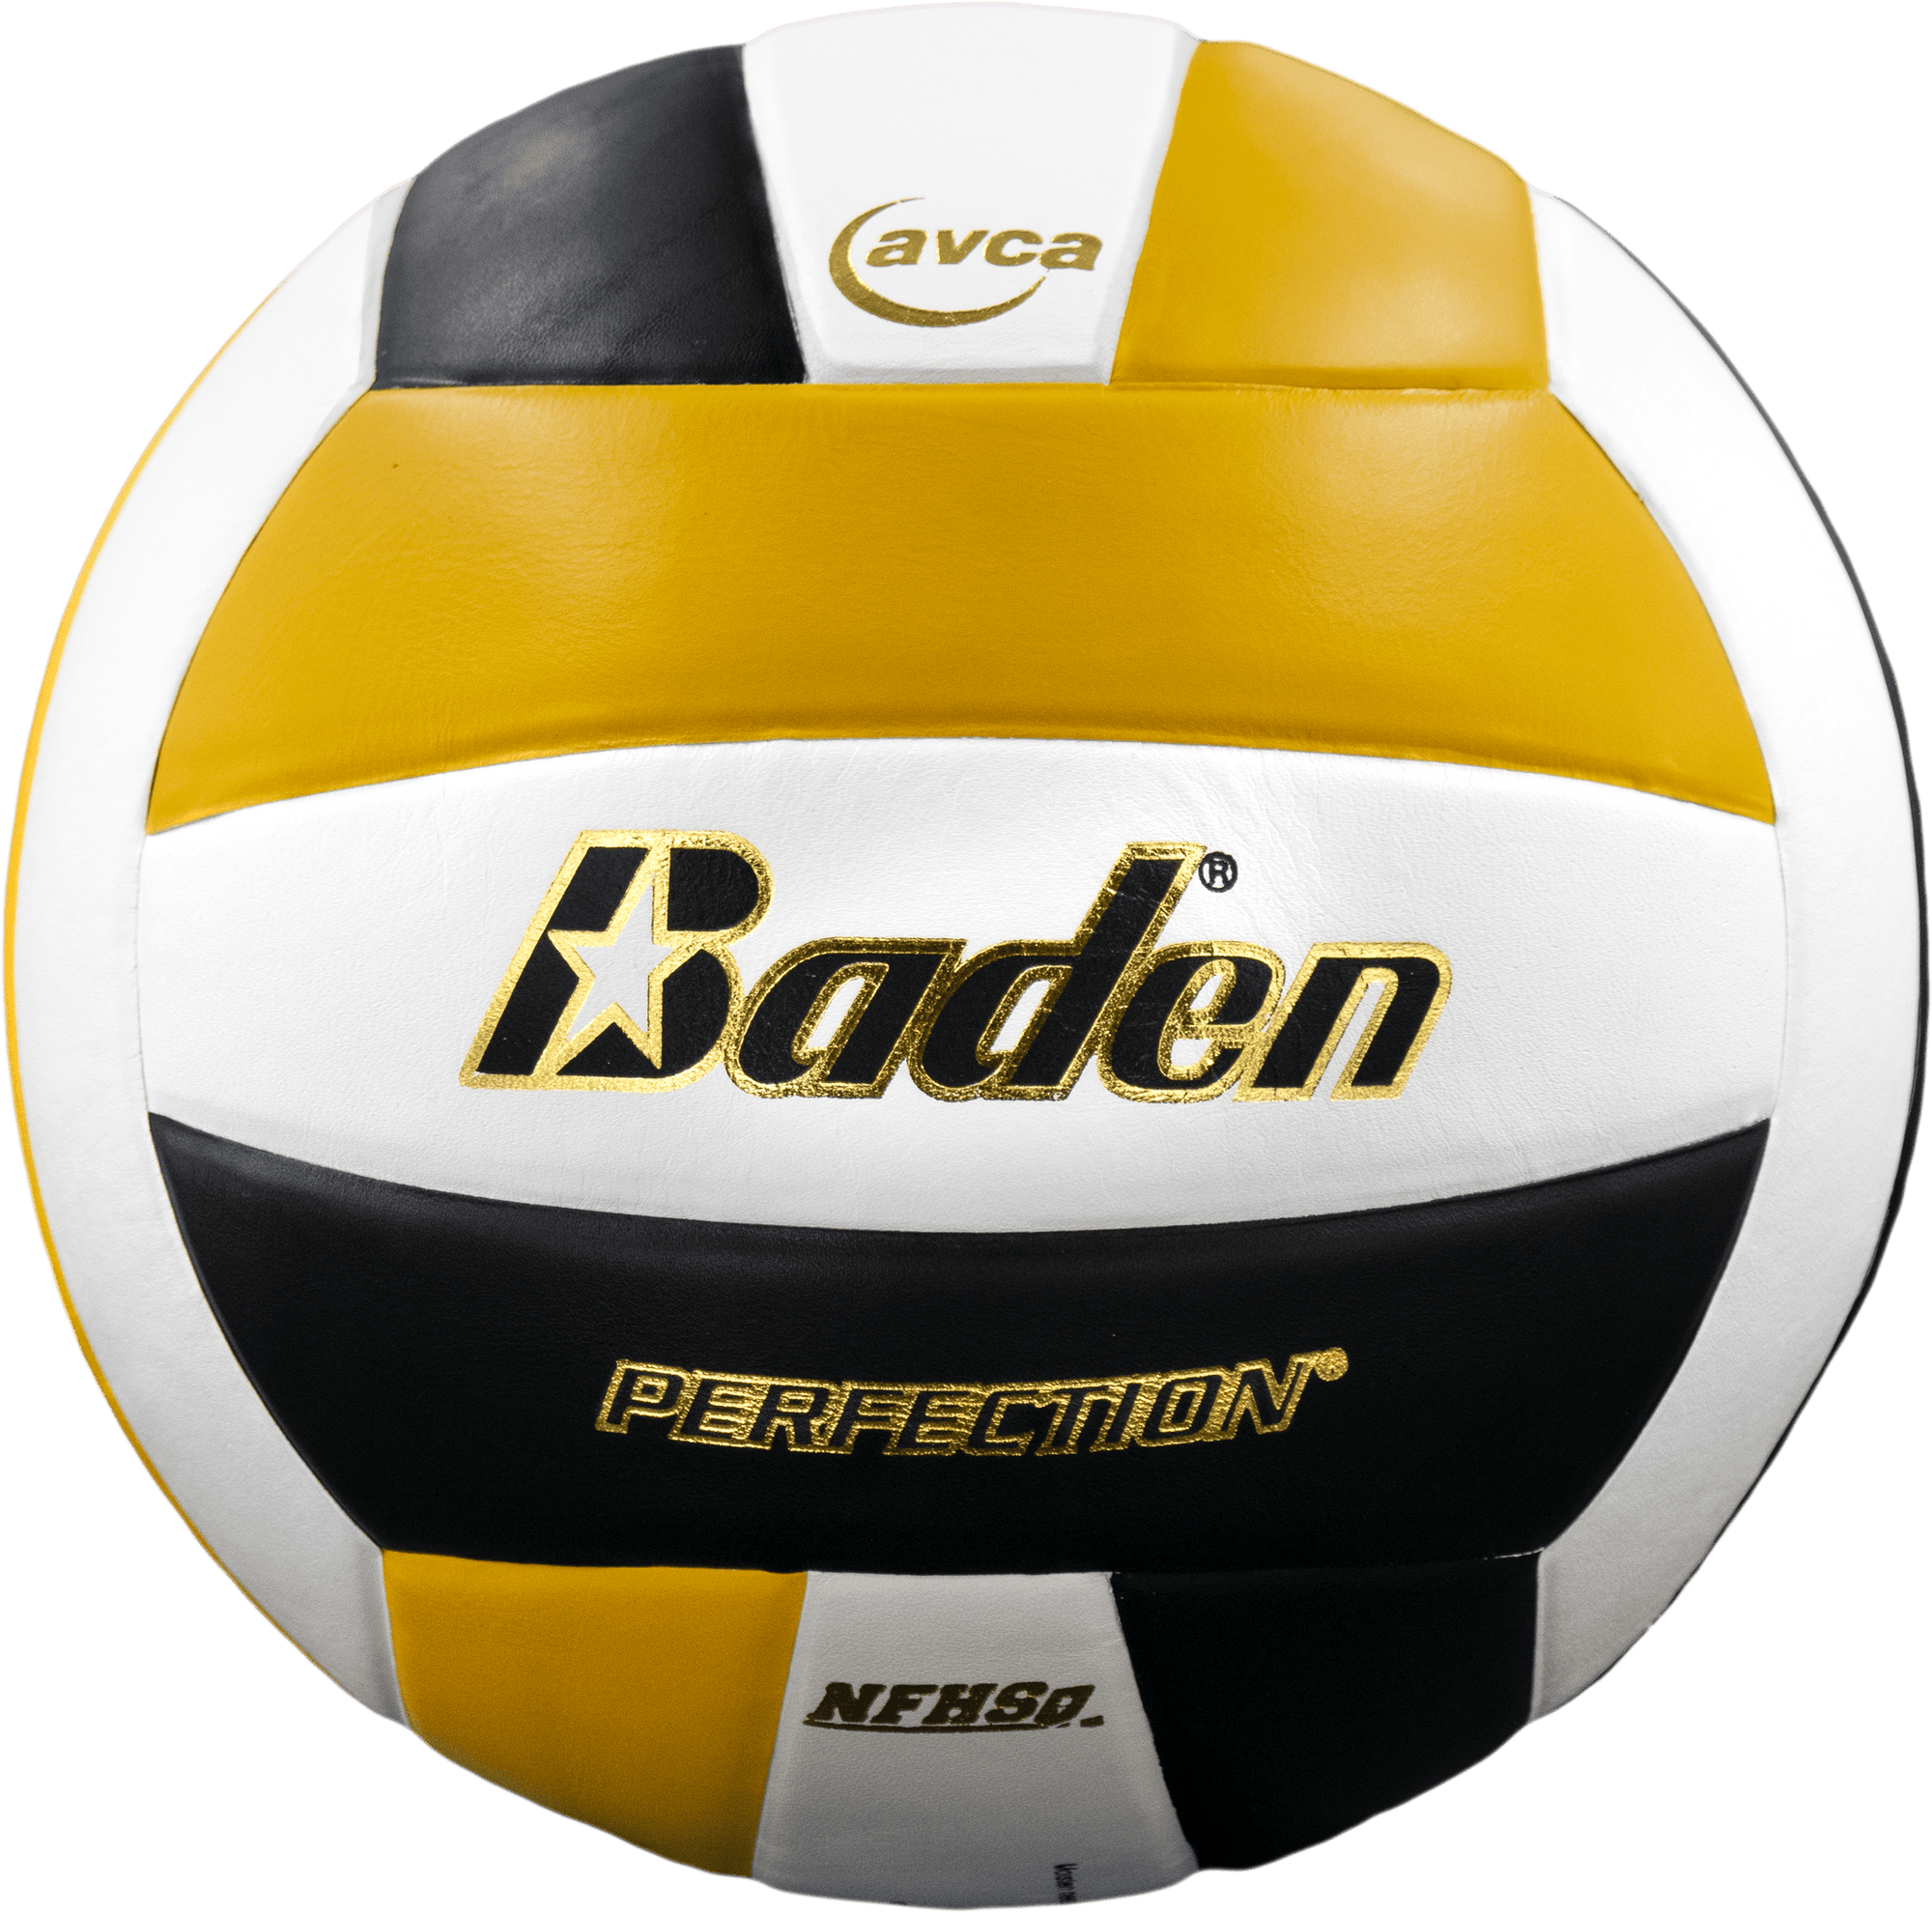 Perfection Leather - Baden Sports Volleyball